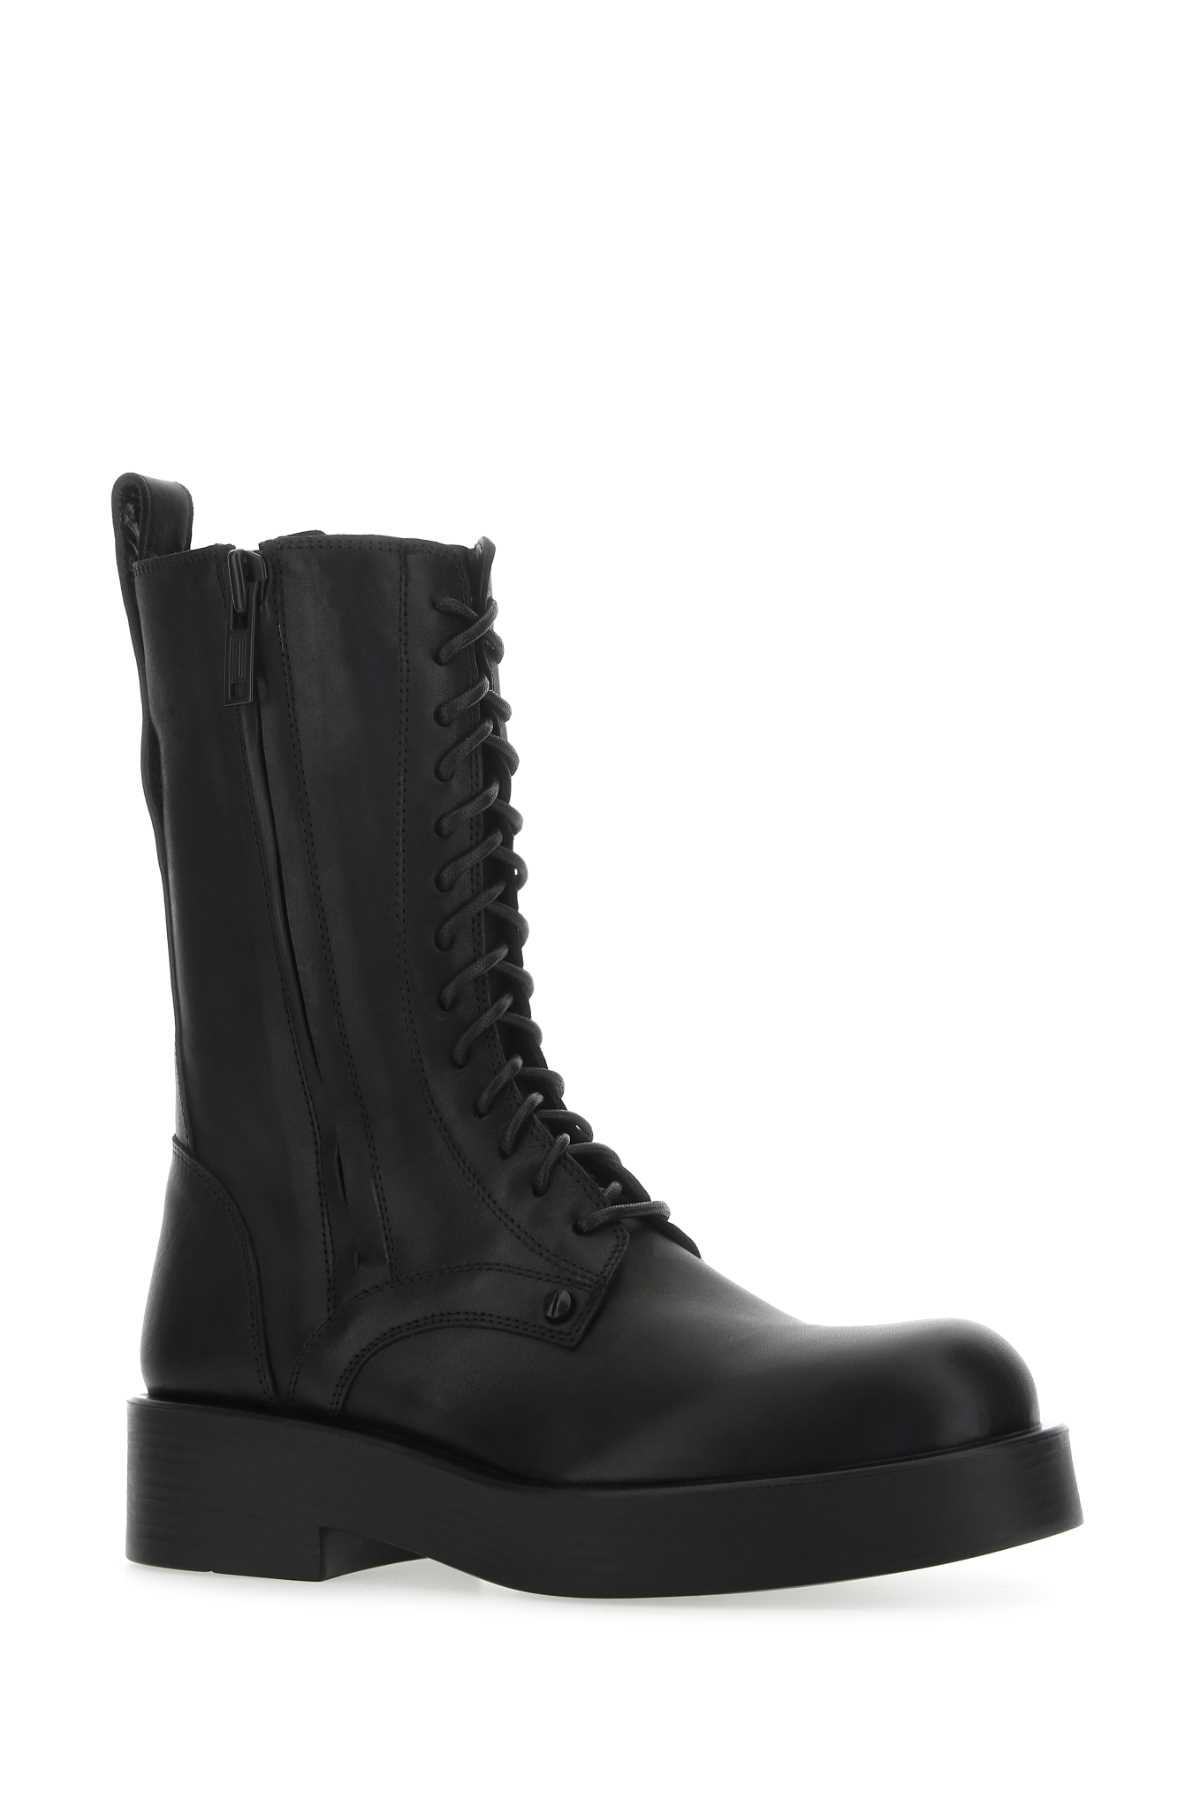 Ann Demeulemeester Black Leather Maxim Ankle Boots In 099